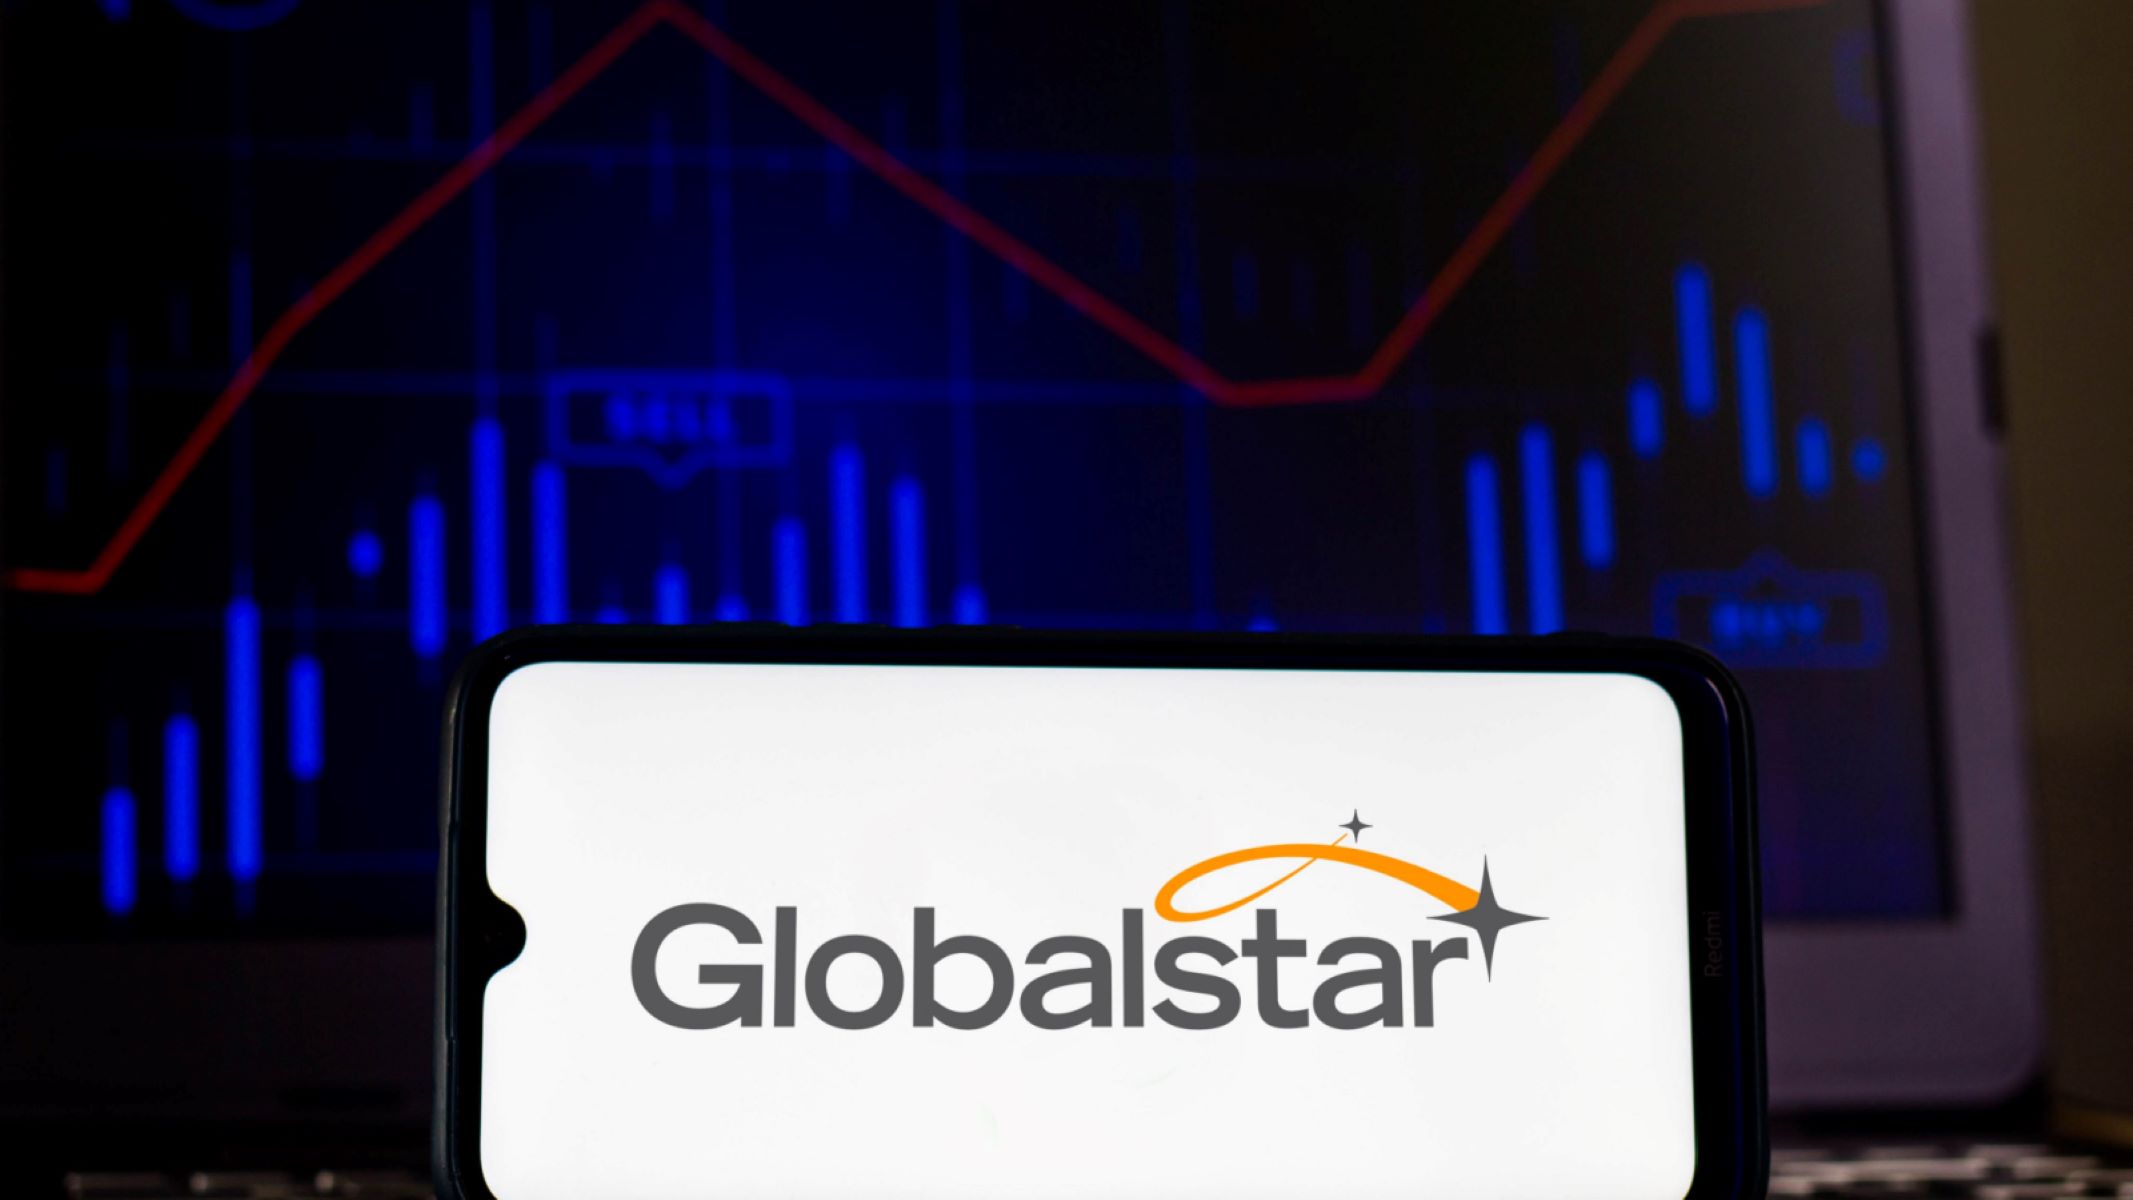 Globalstar Secures $64 Million Launch Contract With SpaceX